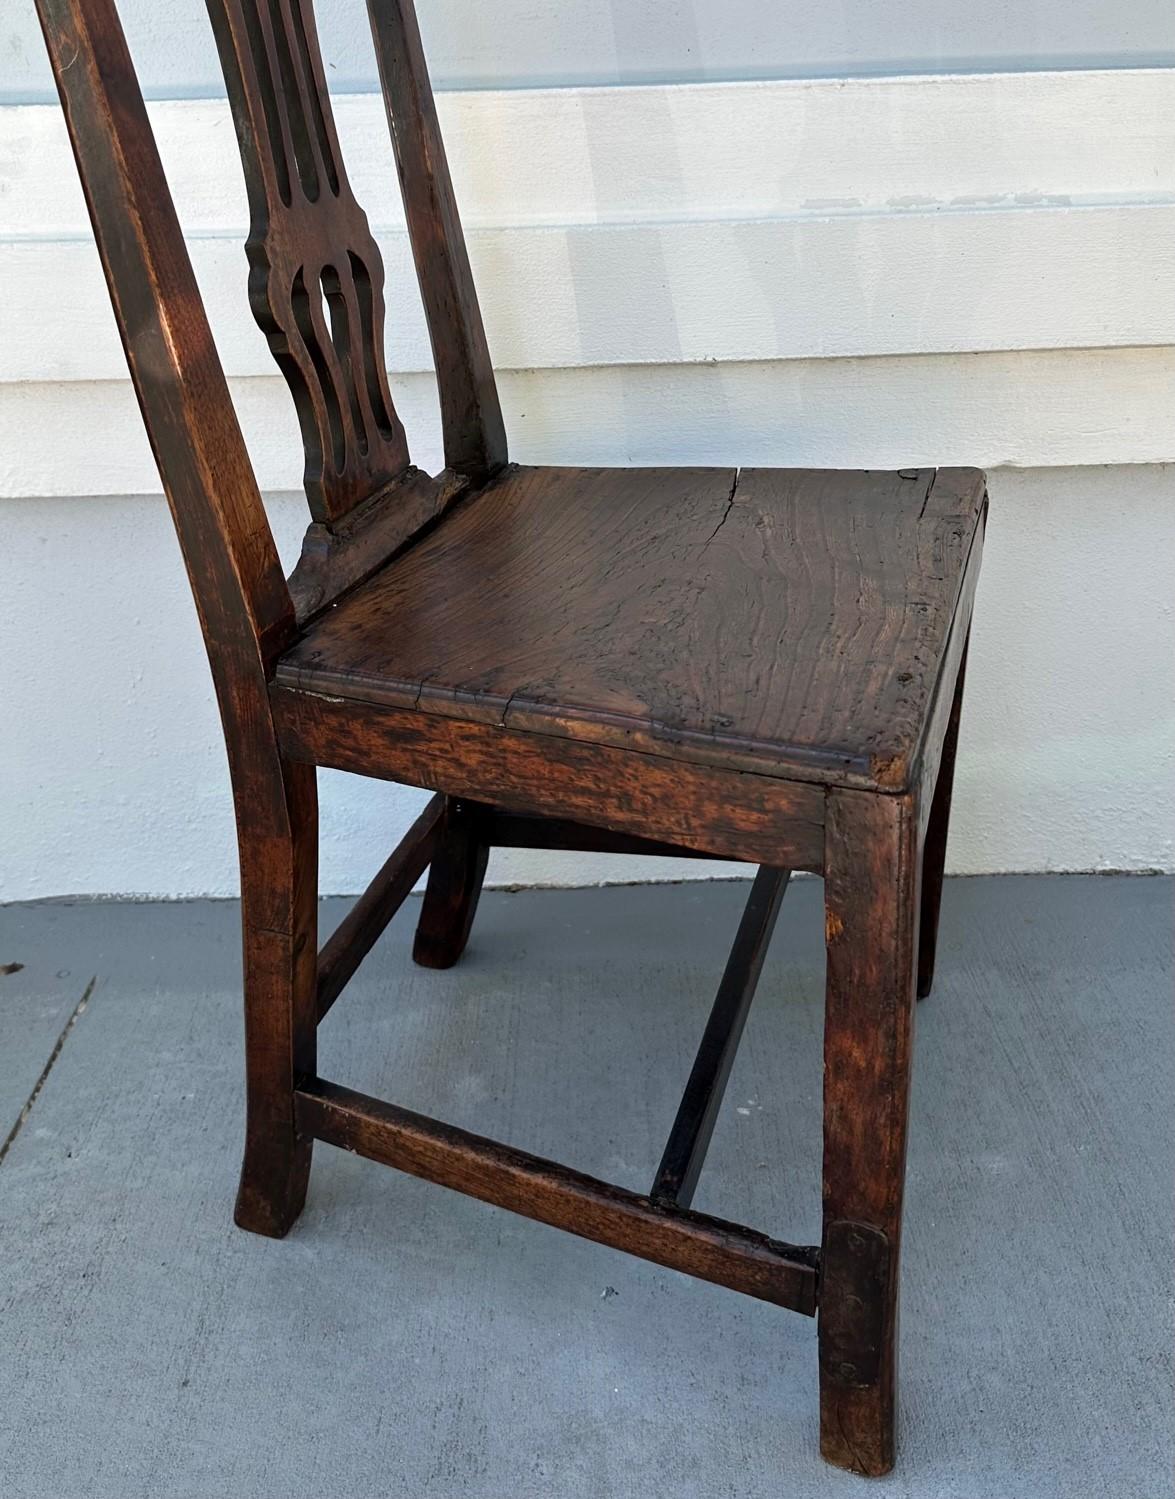 Hand-Carved Unique 18th Century Chippendale Chair Family Heirloom, Extensive Repair. For Sale